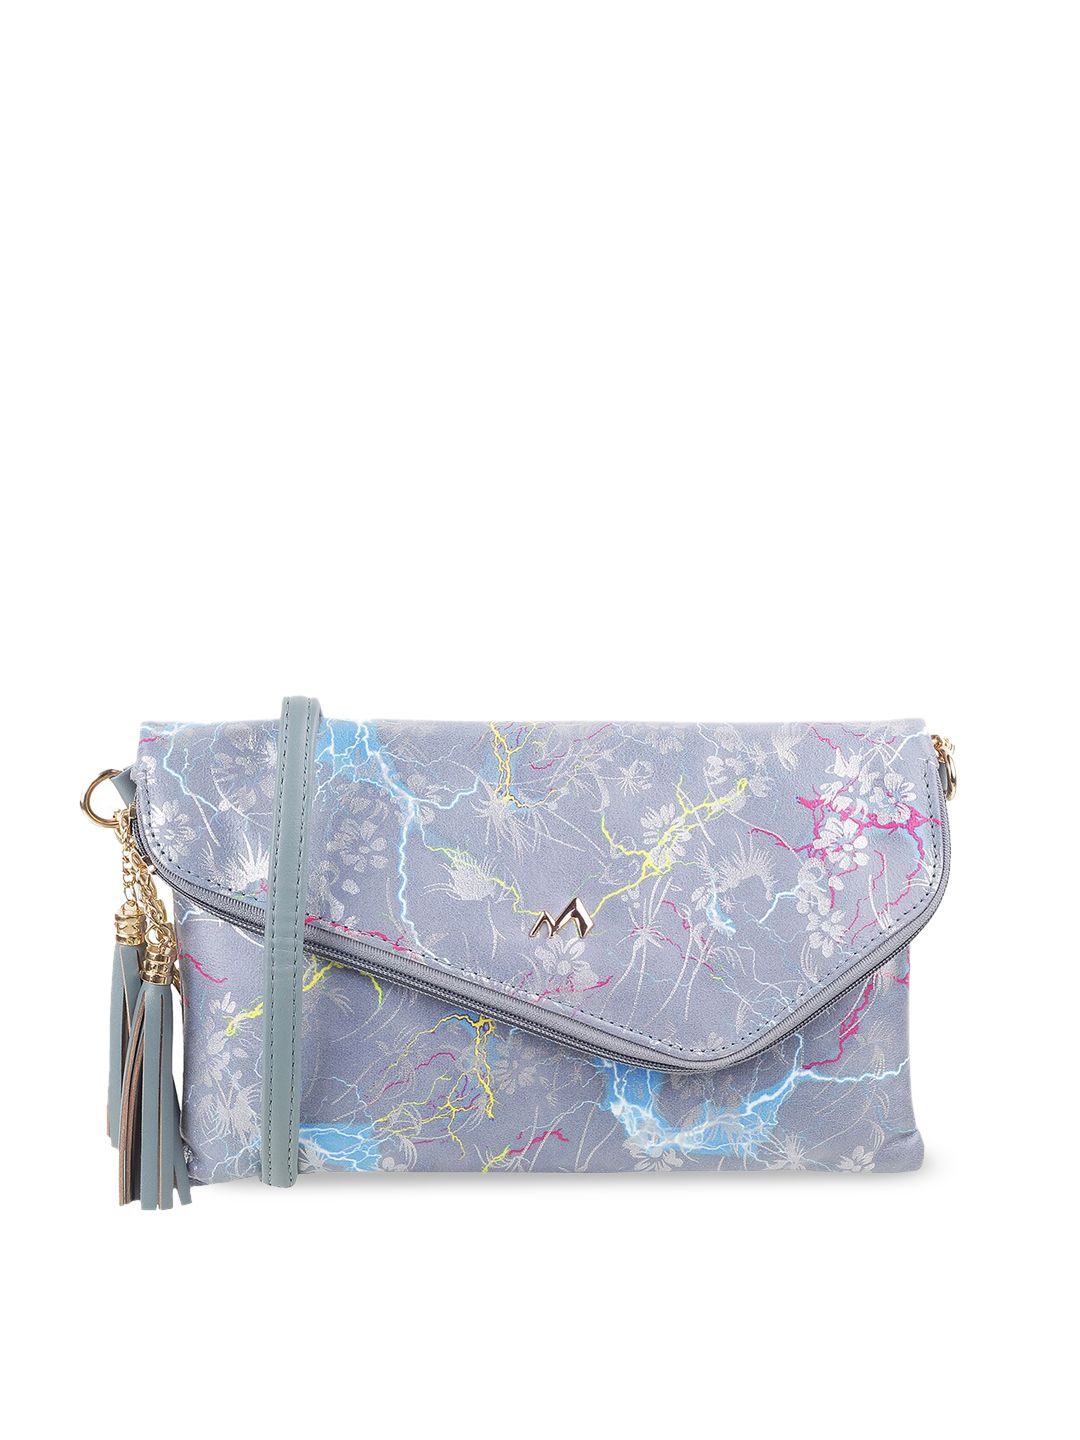 Metro Lavender Textured Structured Sling Bag Price in India